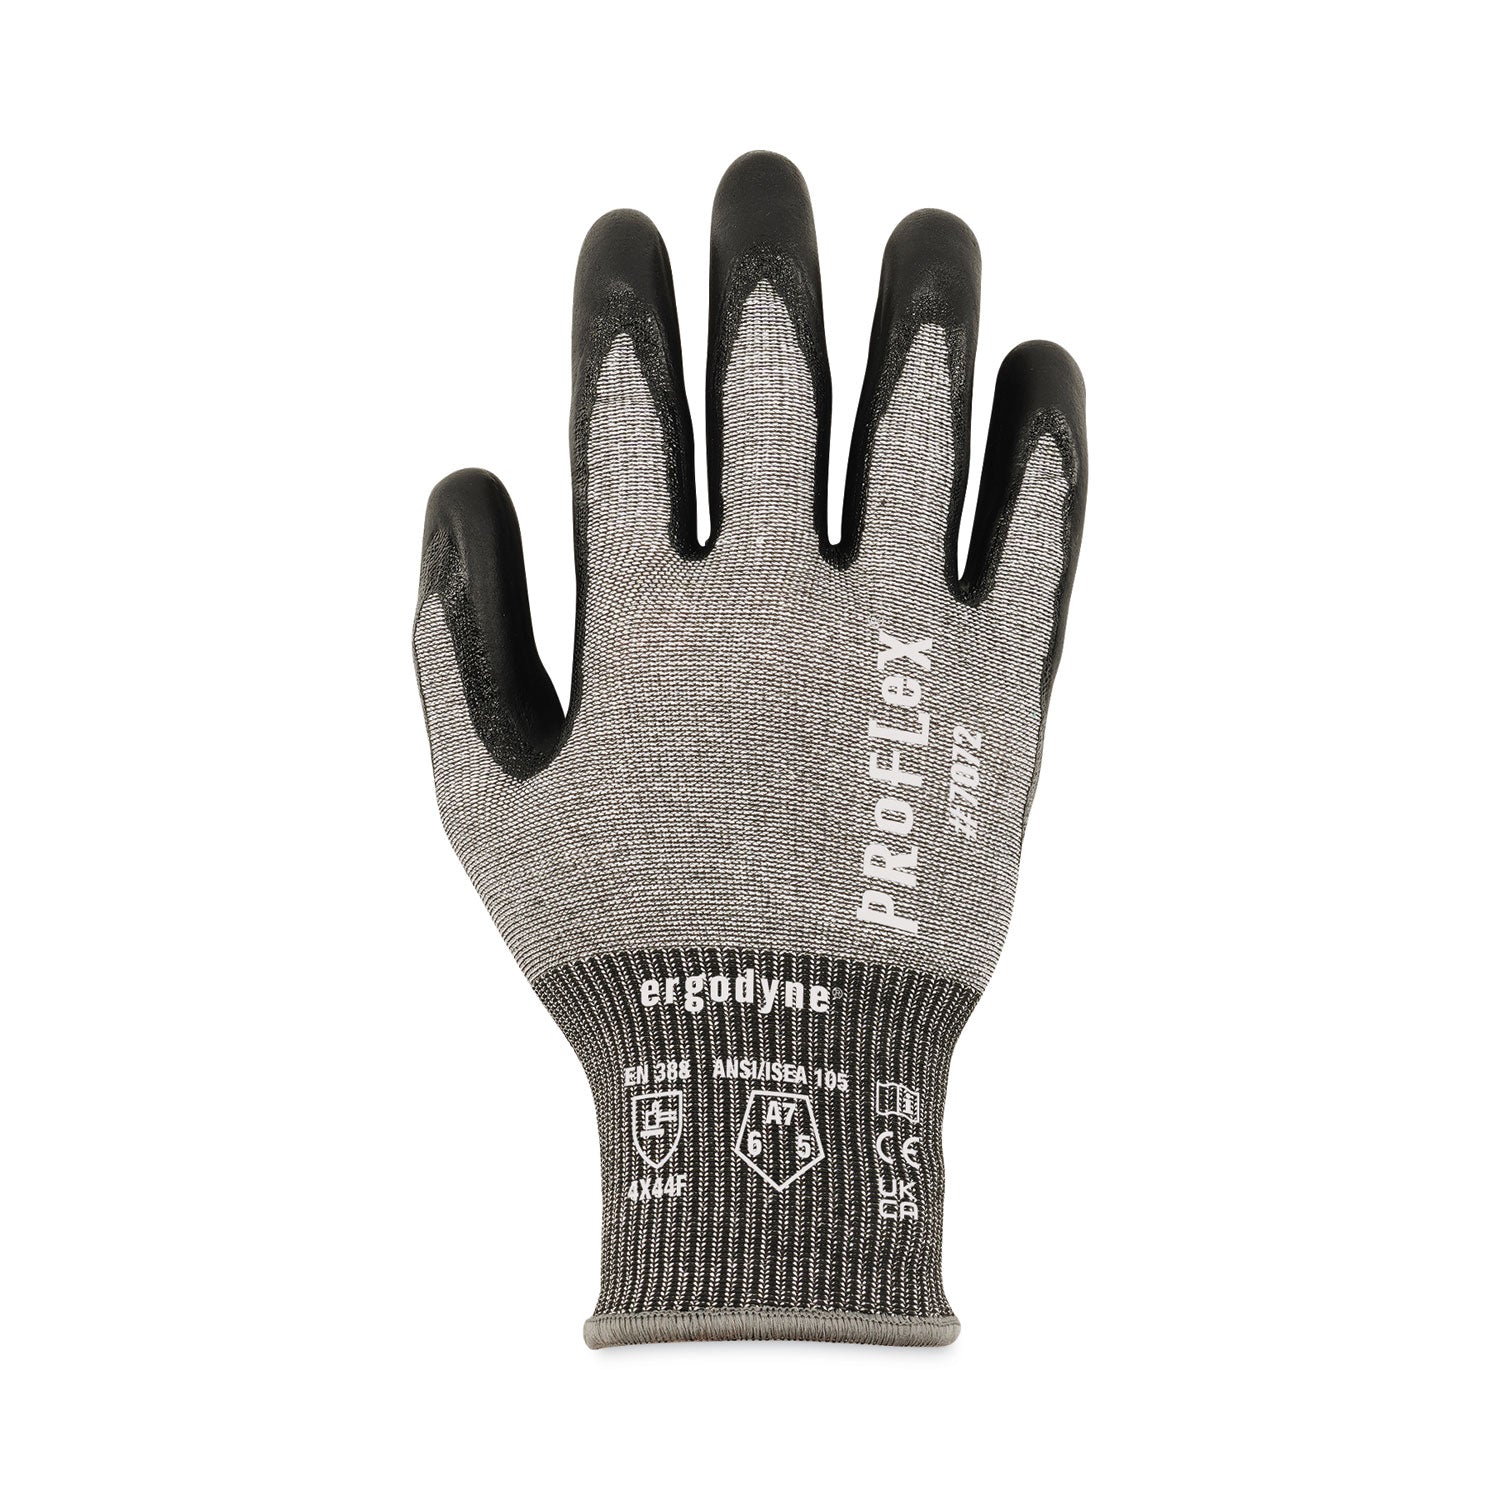 proflex-7072-ansi-a7-nitrile-coated-cr-gloves-gray-large-pair-ships-in-1-3-business-days_ego10314 - 6